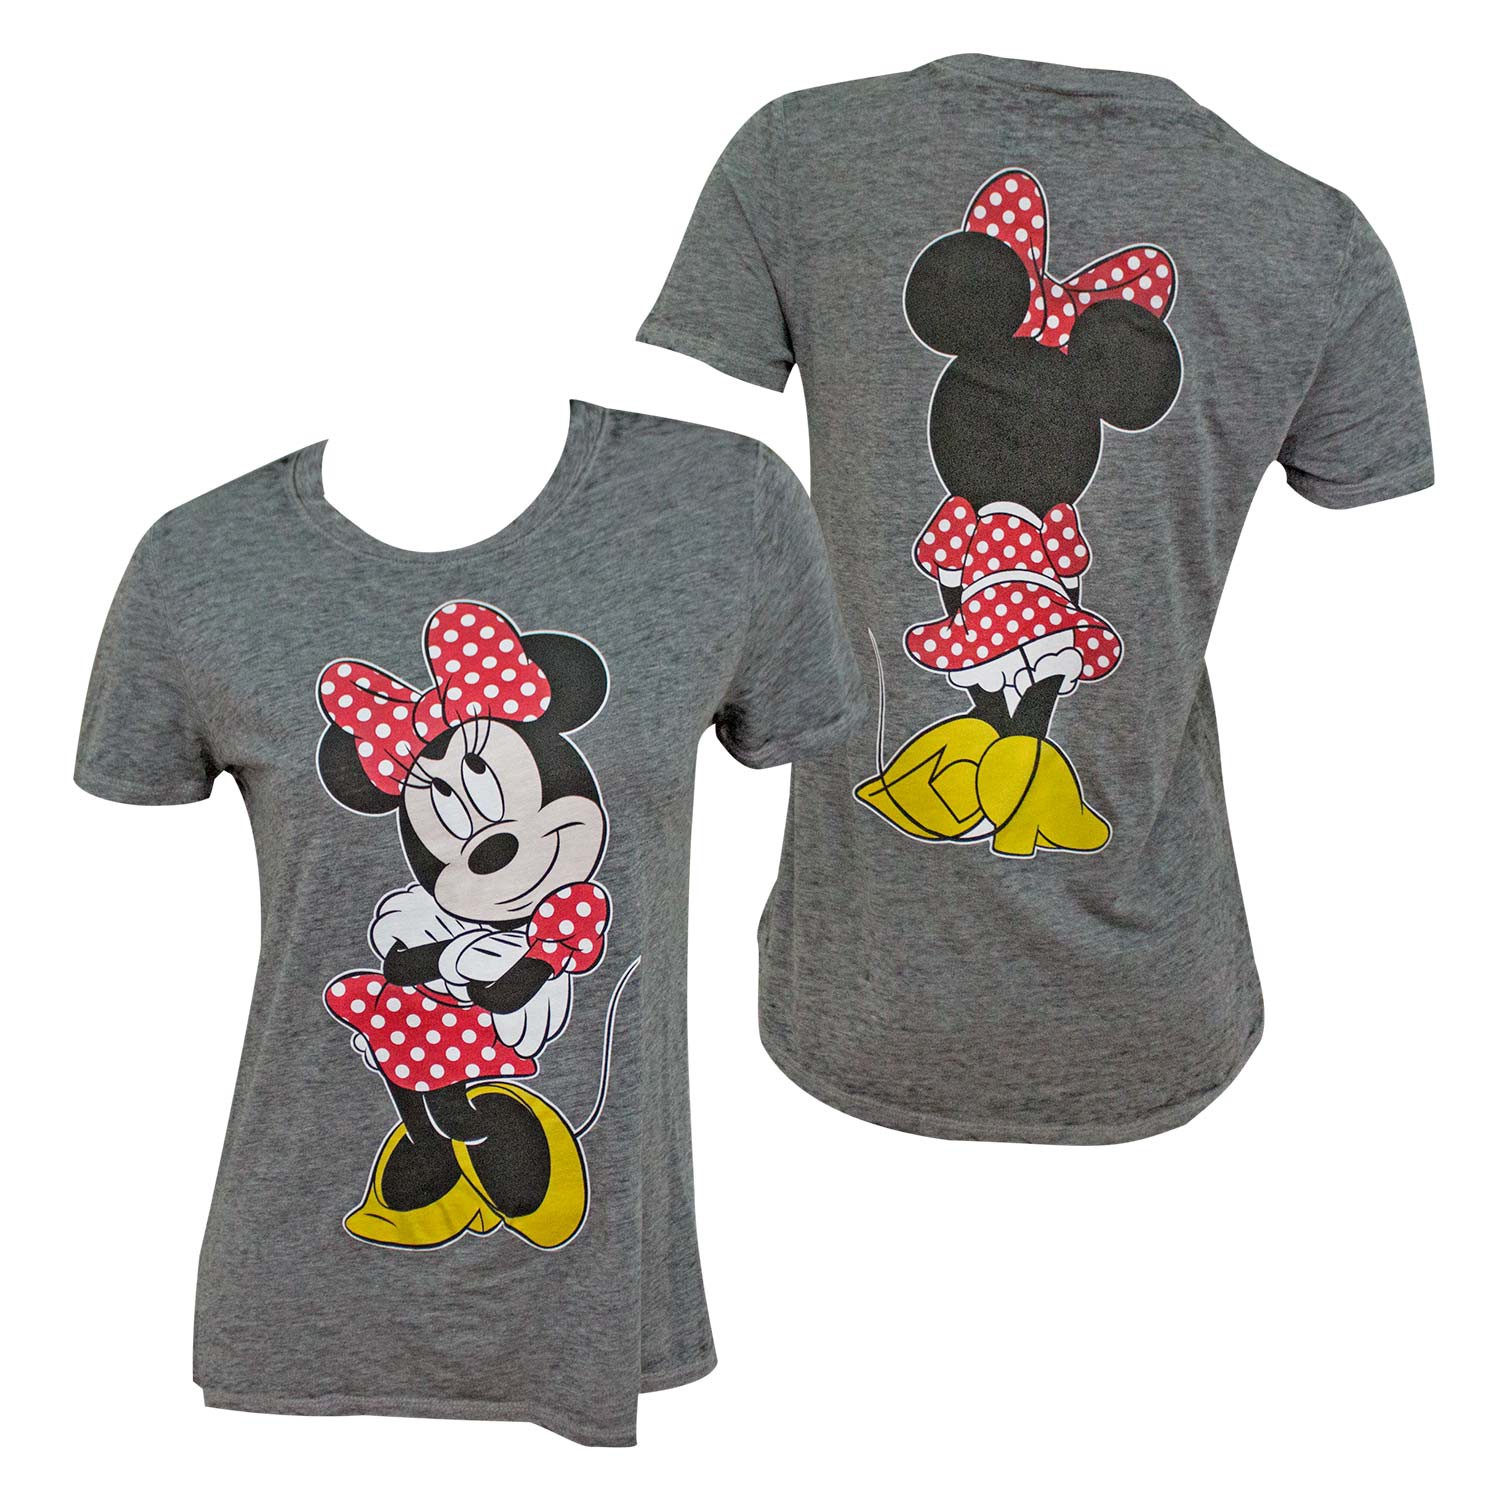 Minnie Mouse Front Back Print Women's Grey T-Shirt